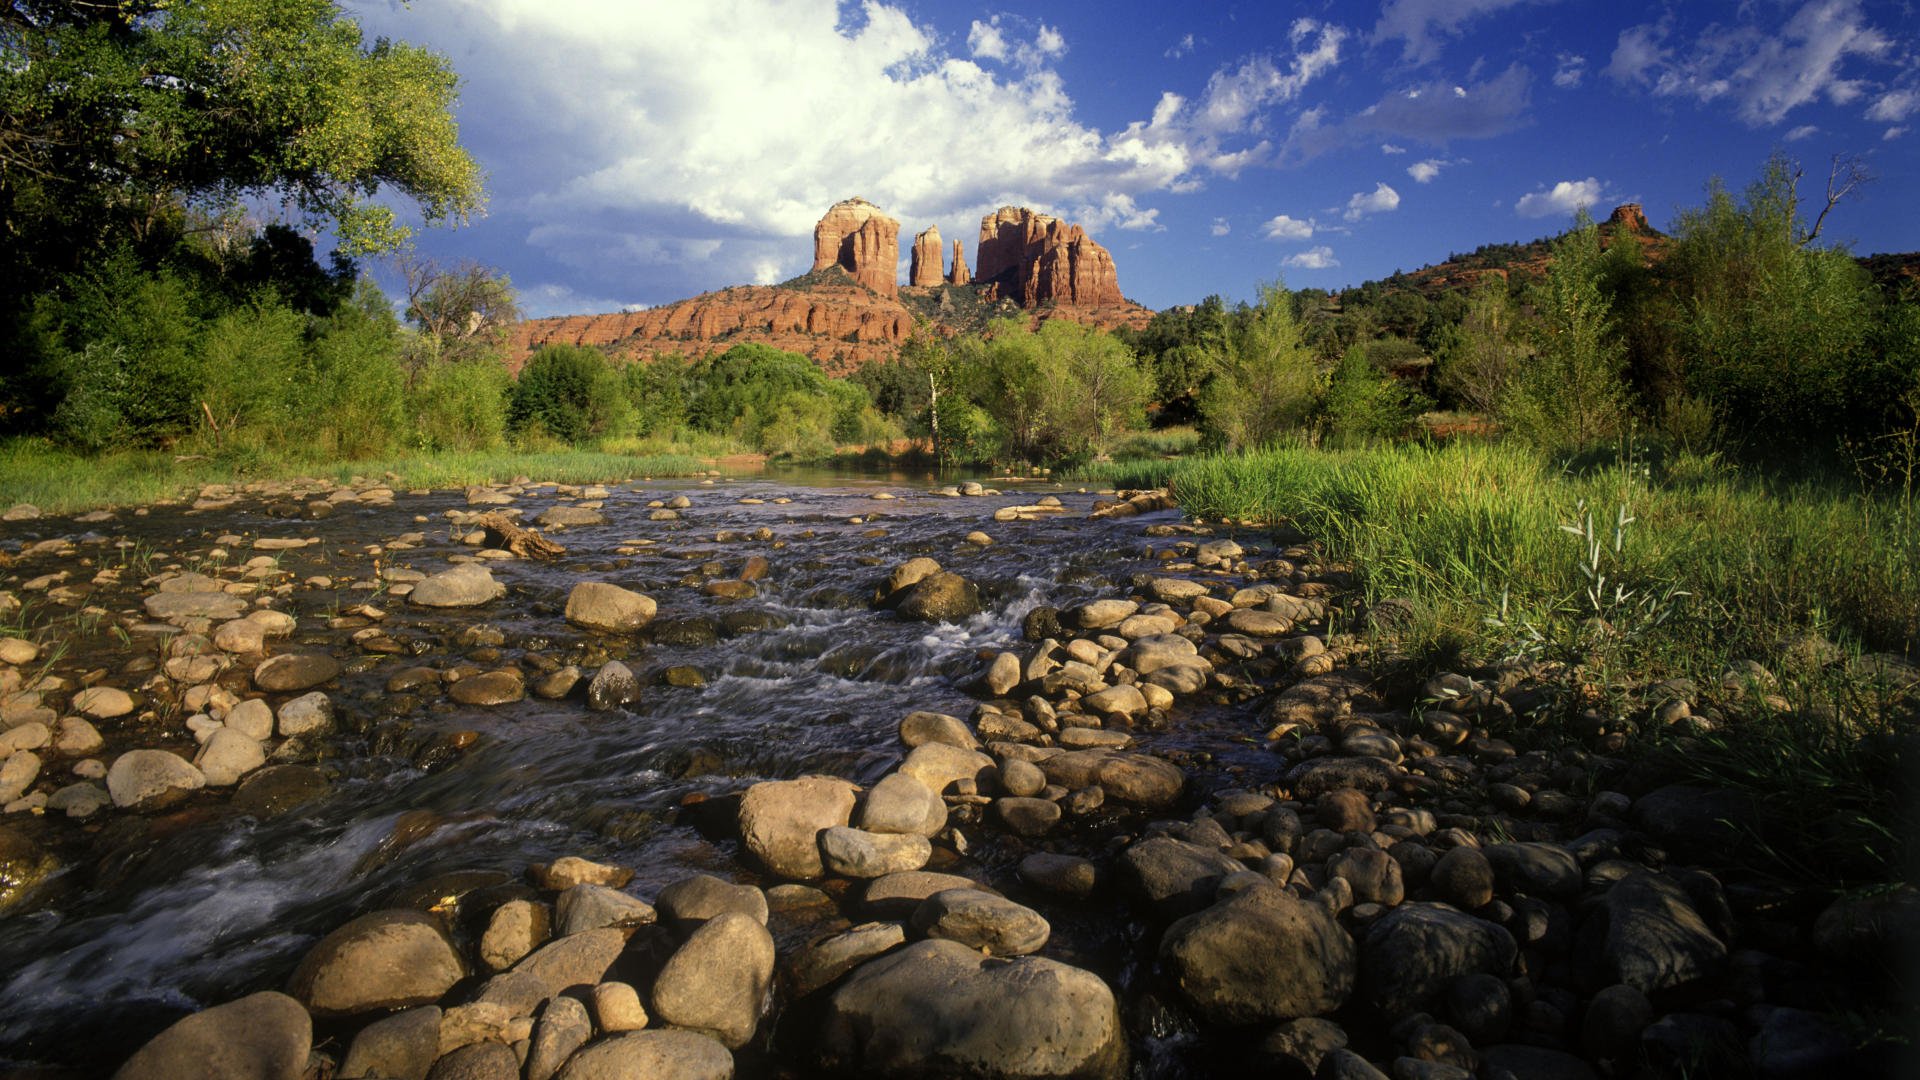 Arizona HD Picture Wallpapers 6488   HD Wallpapers Site 1920x1080